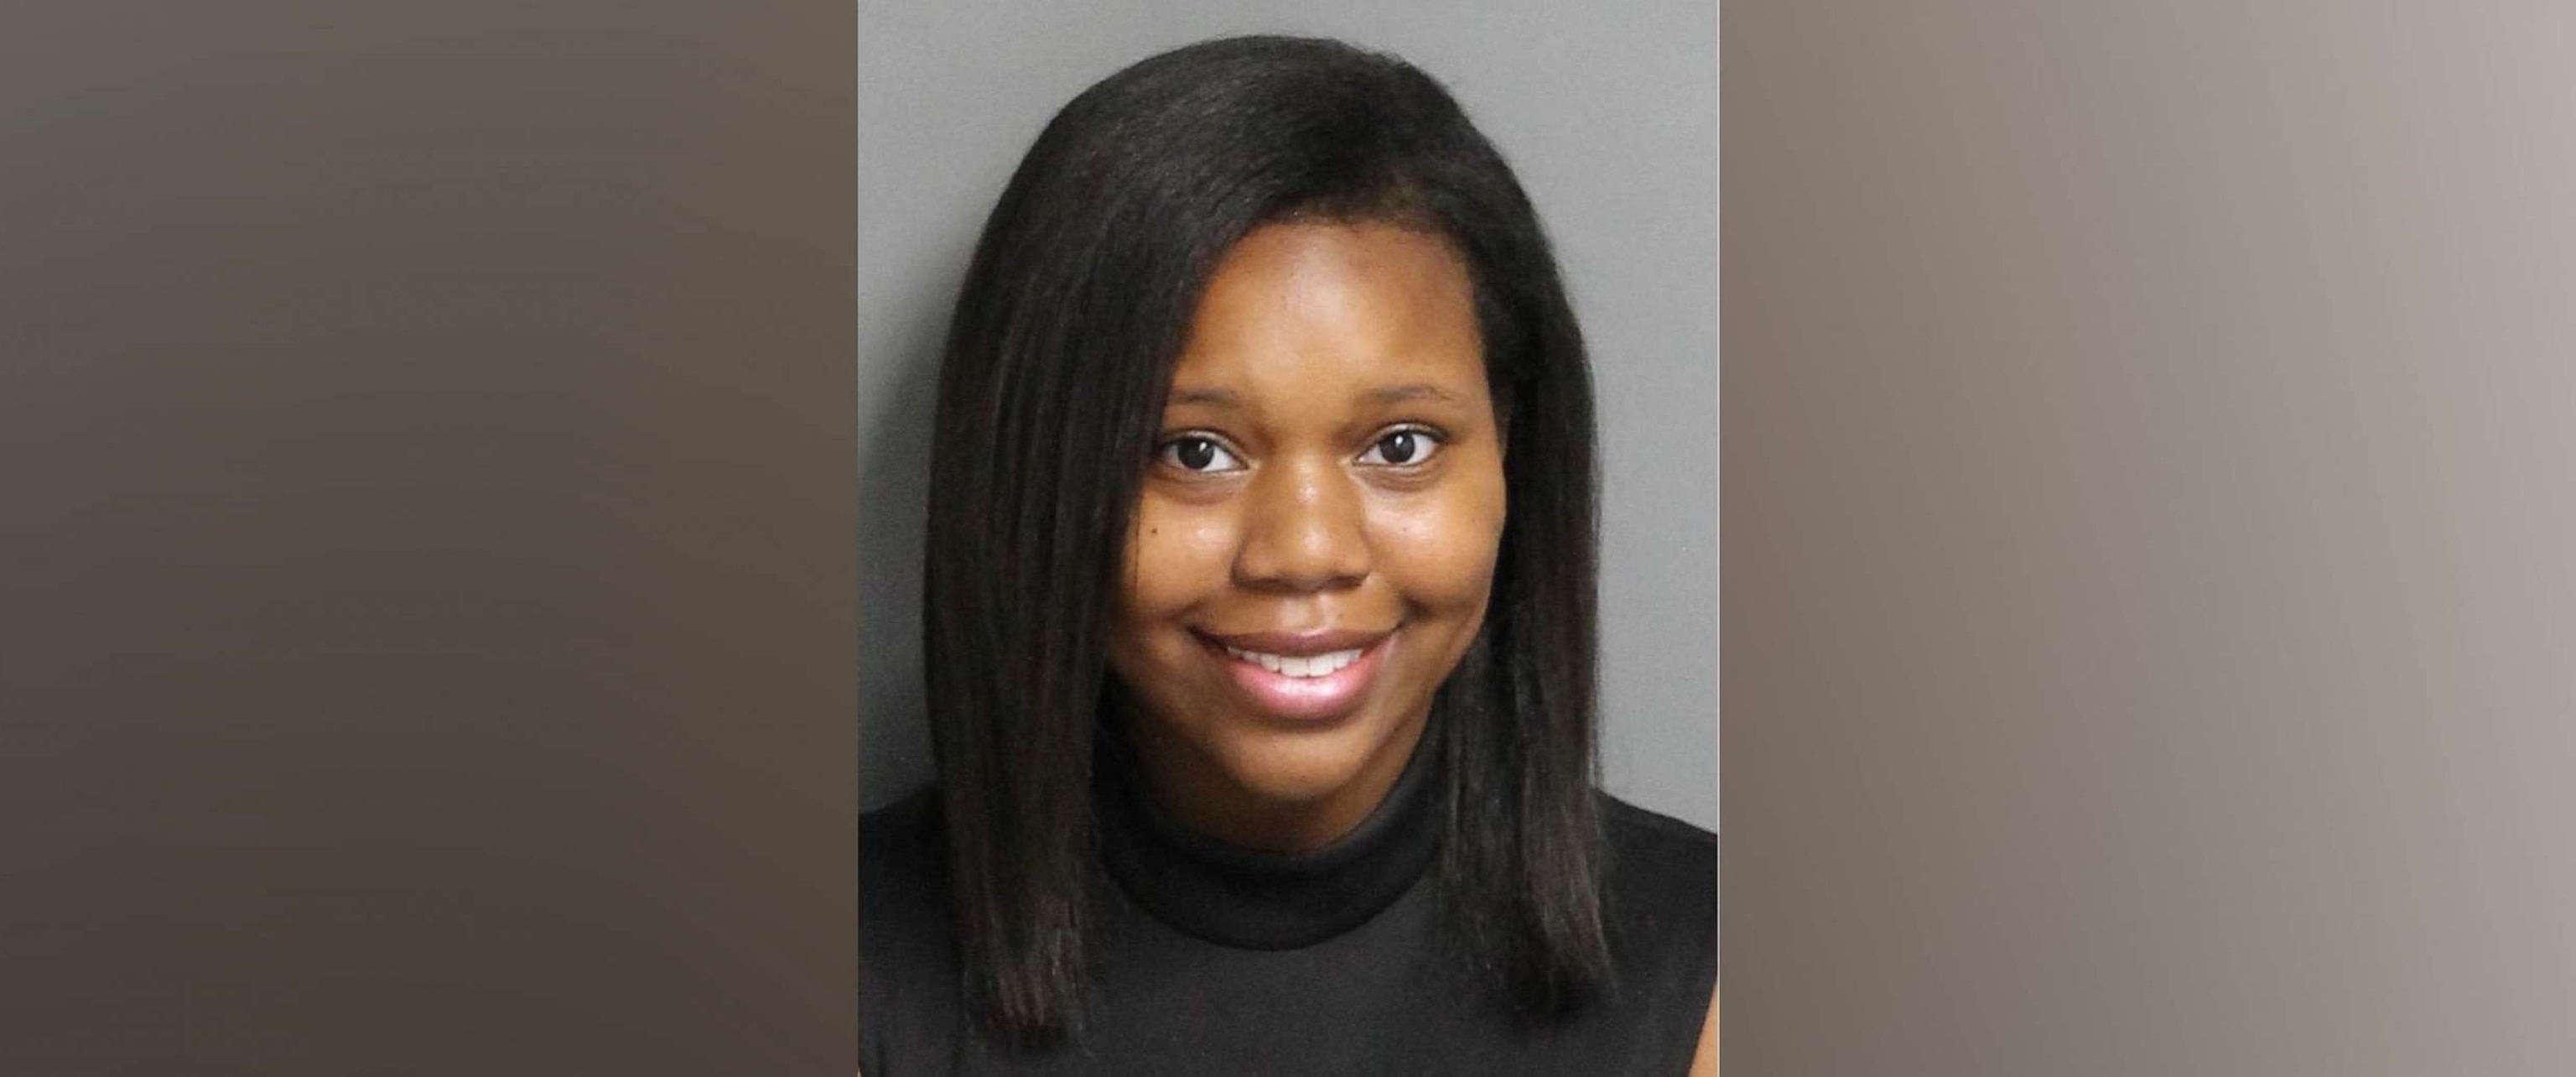 PHOTO: Carlee Russell, the Alabama woman who told police she was kidnapped after she went missing for two days, was arrested on Friday and charged with two misdemeanors for making false statements to police.